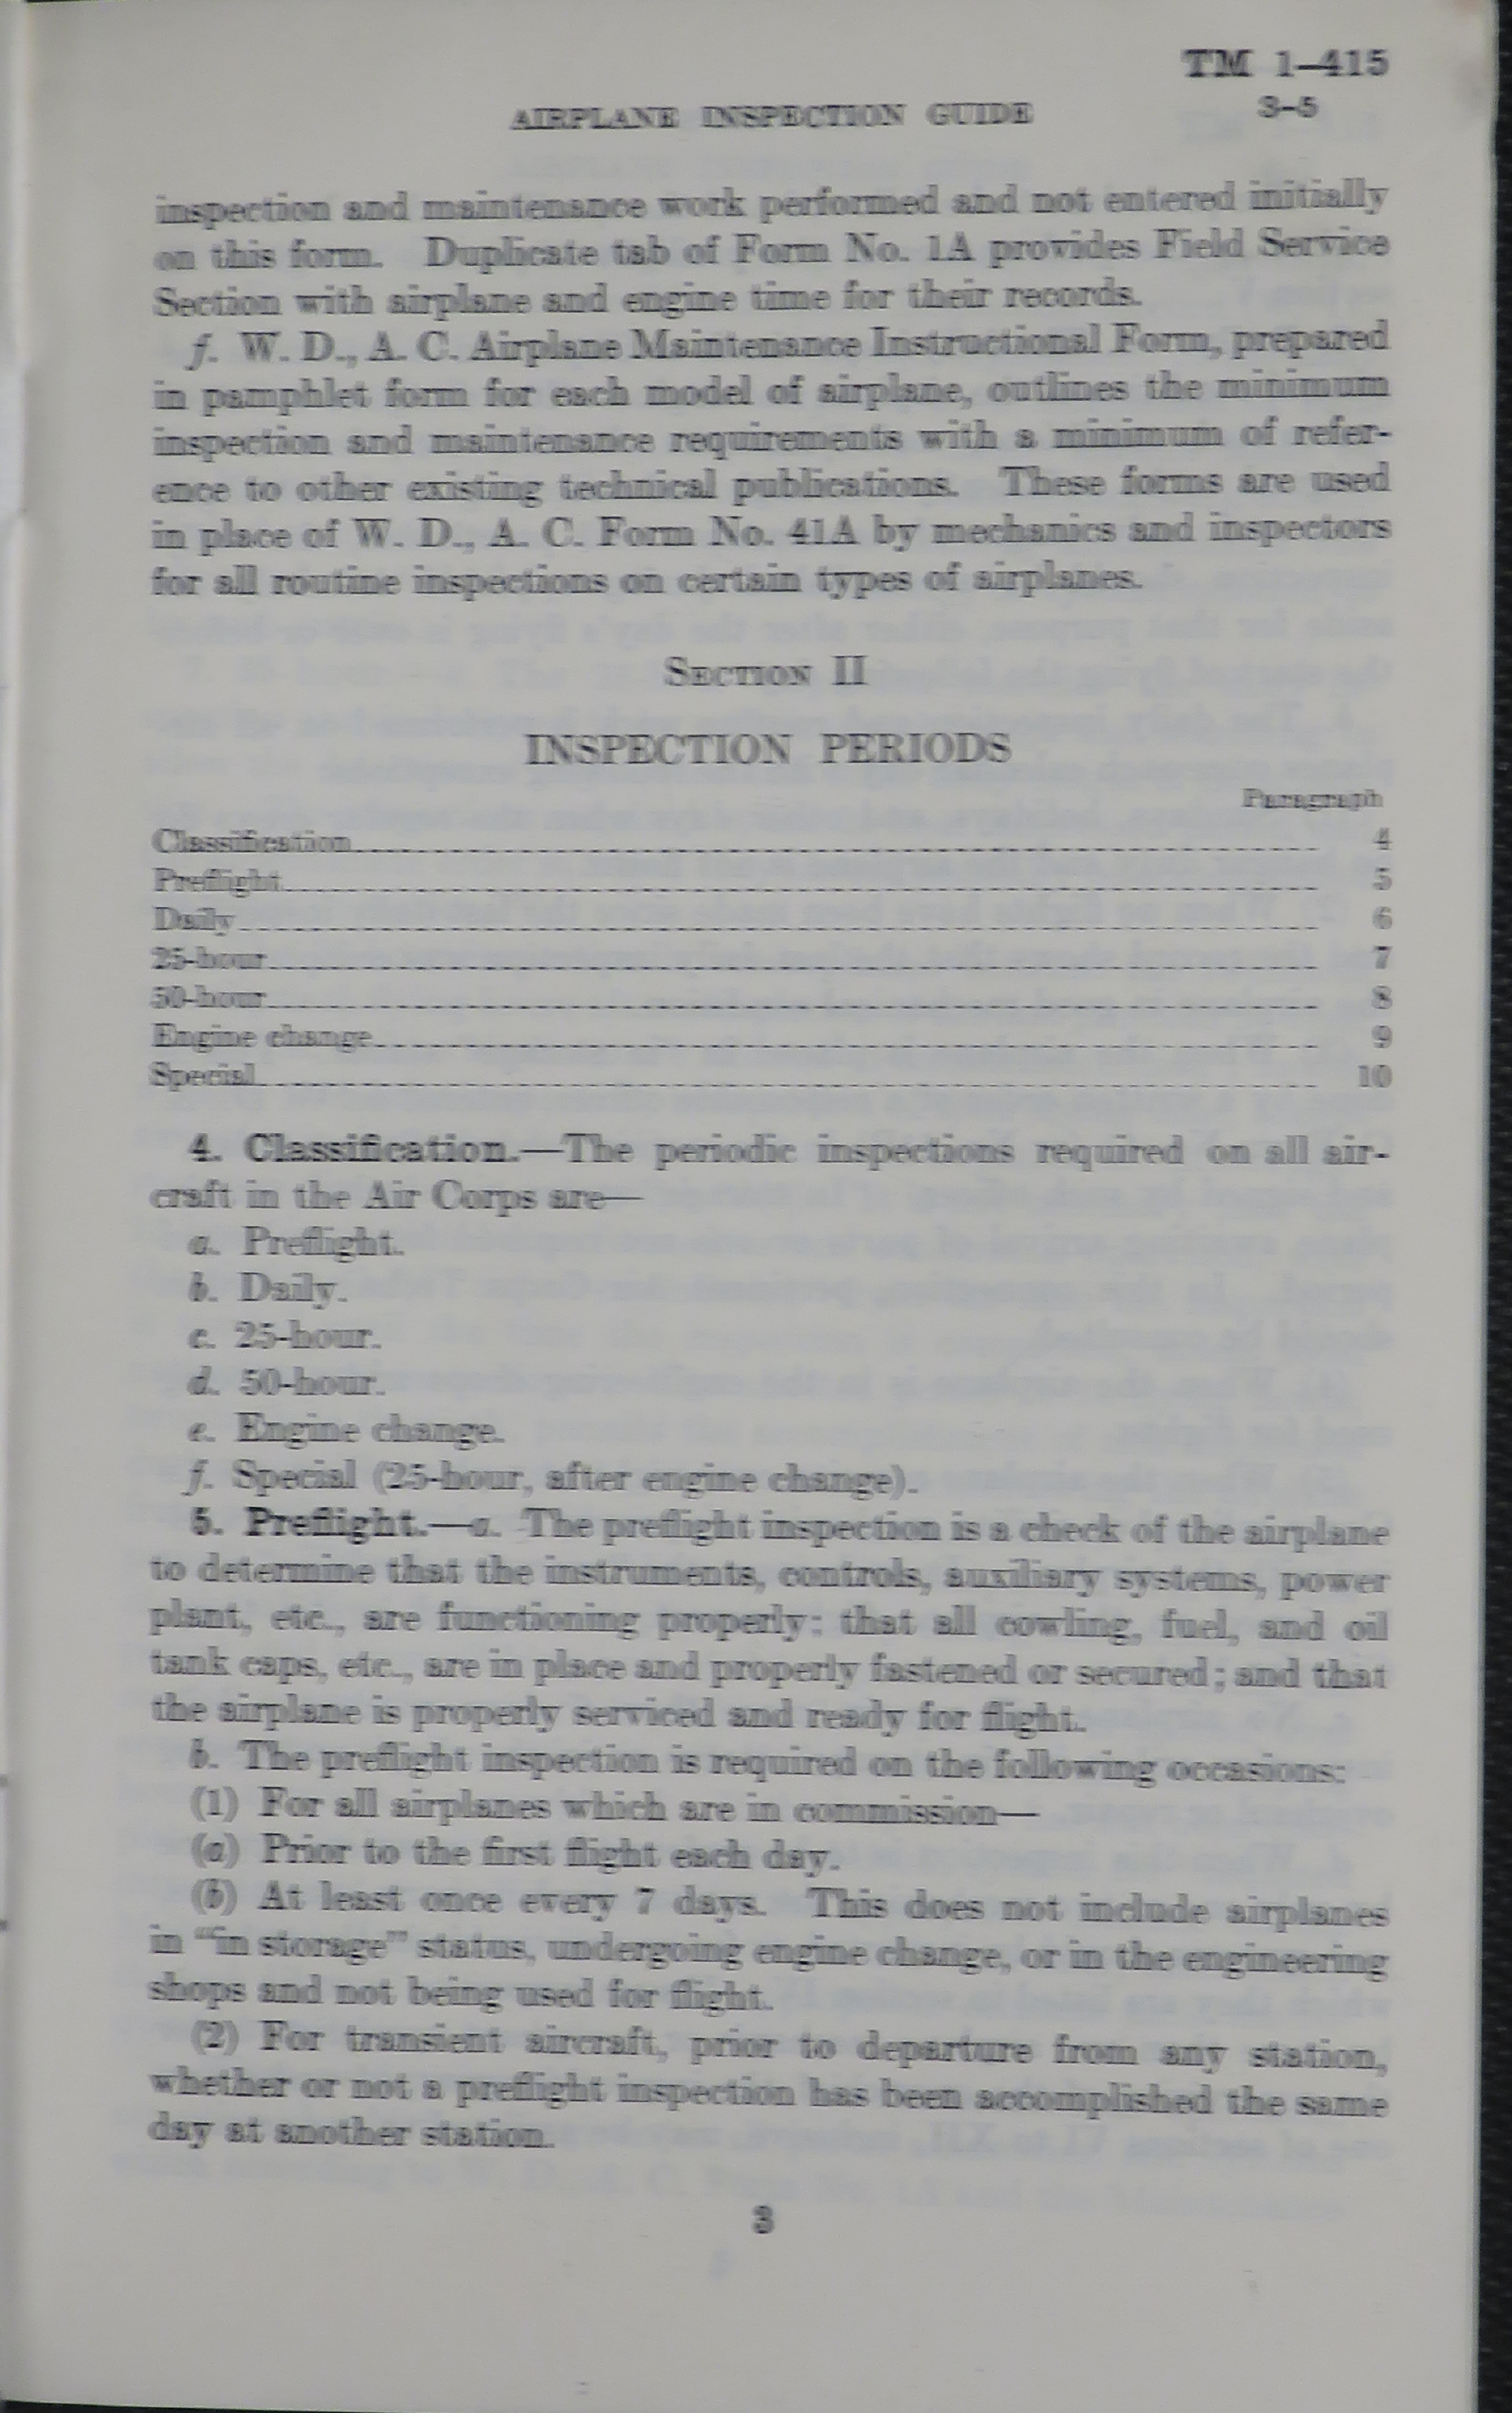 Sample page 5 from AirCorps Library document: Technical Manual for Airplane Inspection Guide